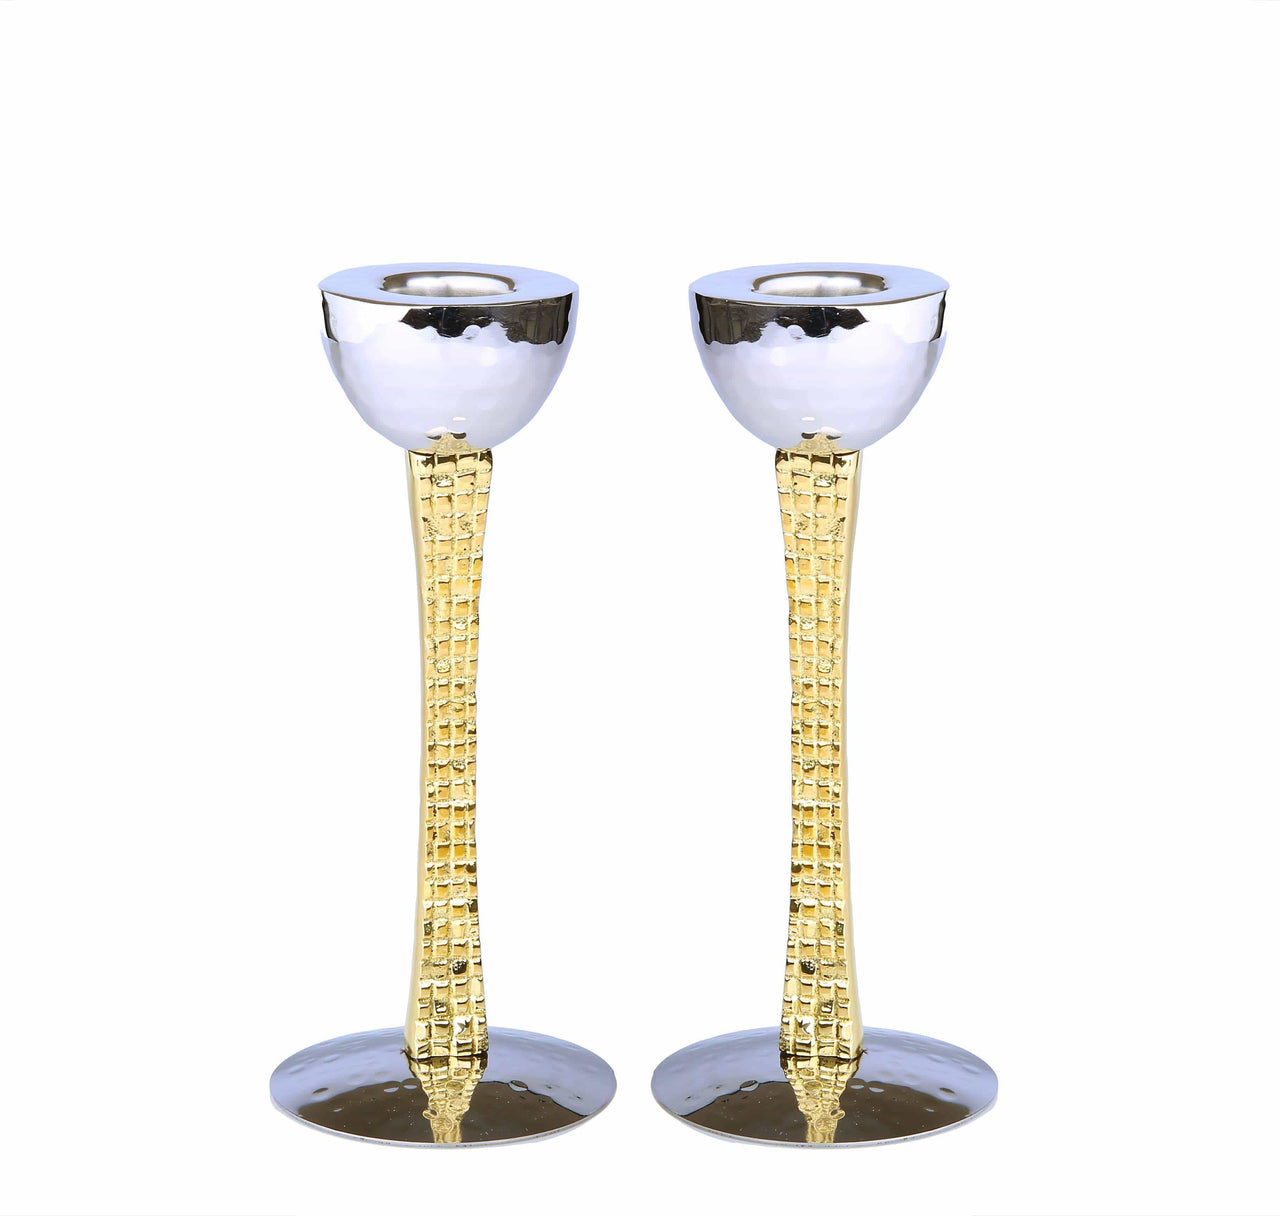 Classic Touch Decor Candlesticks Gold and Nickel Candlesticks with Mosaic Design